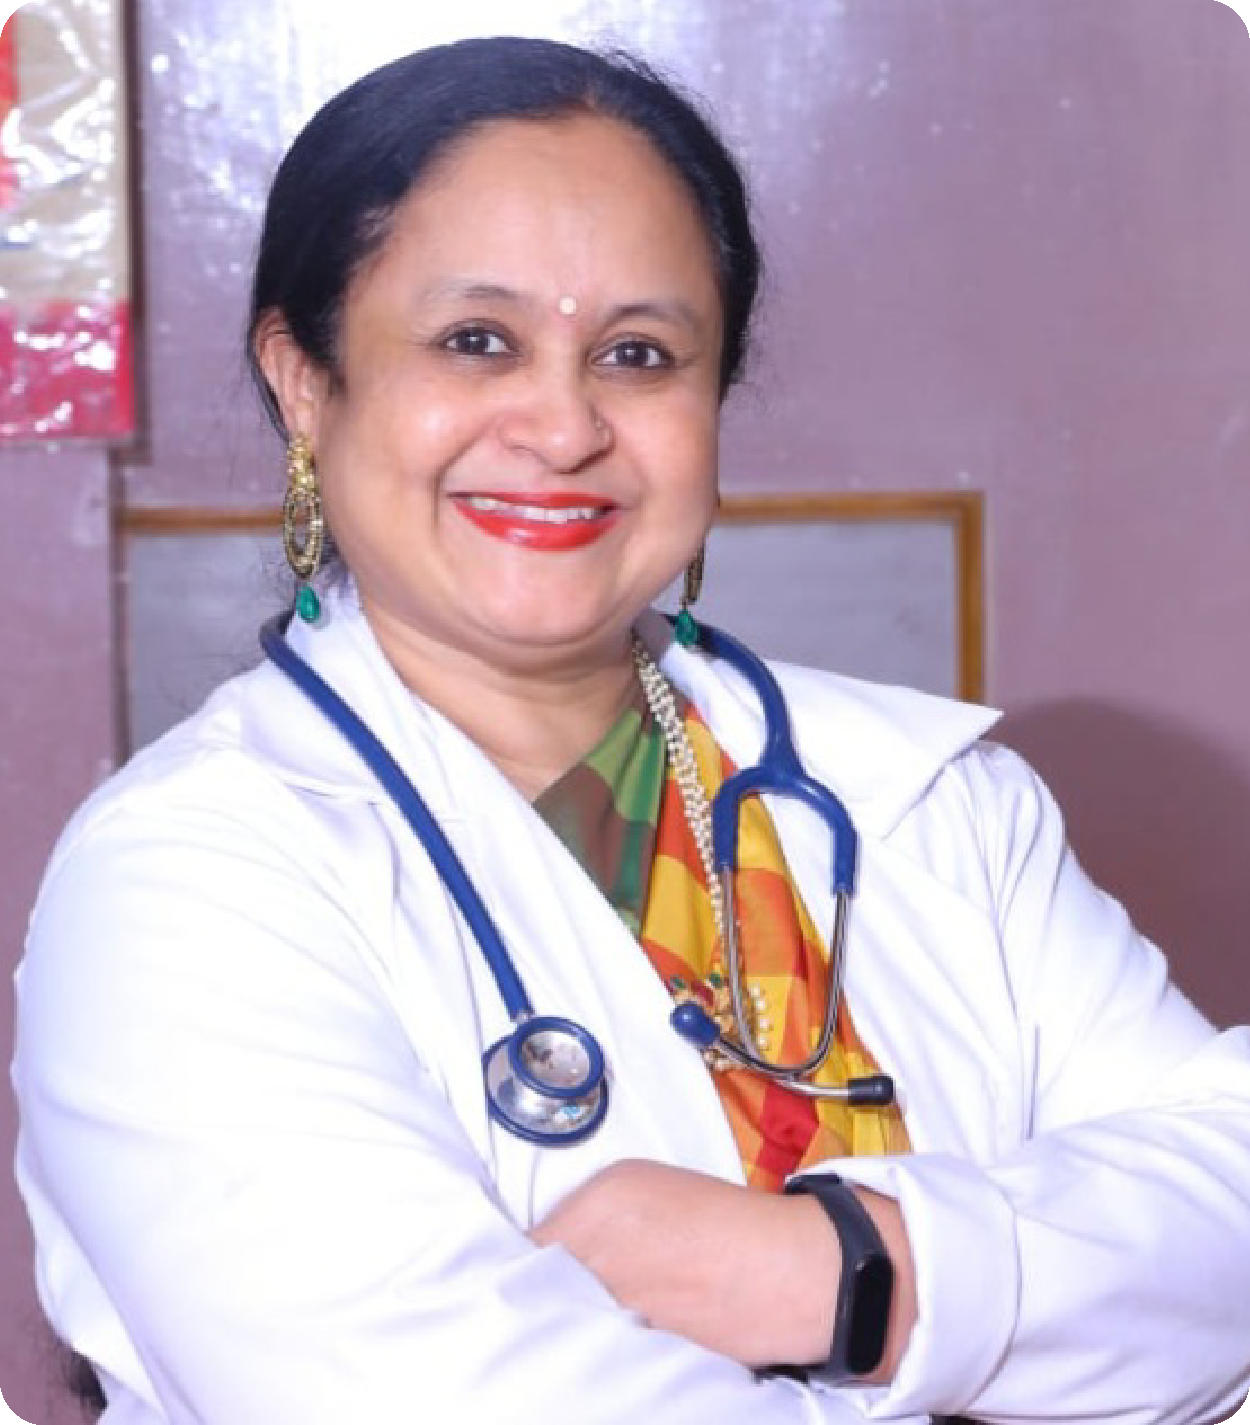 Dr. Rekha Rajendrakumar, Consultant Obstetrician and Gynecologis at Miracle IVF Hospital, Bangalore.